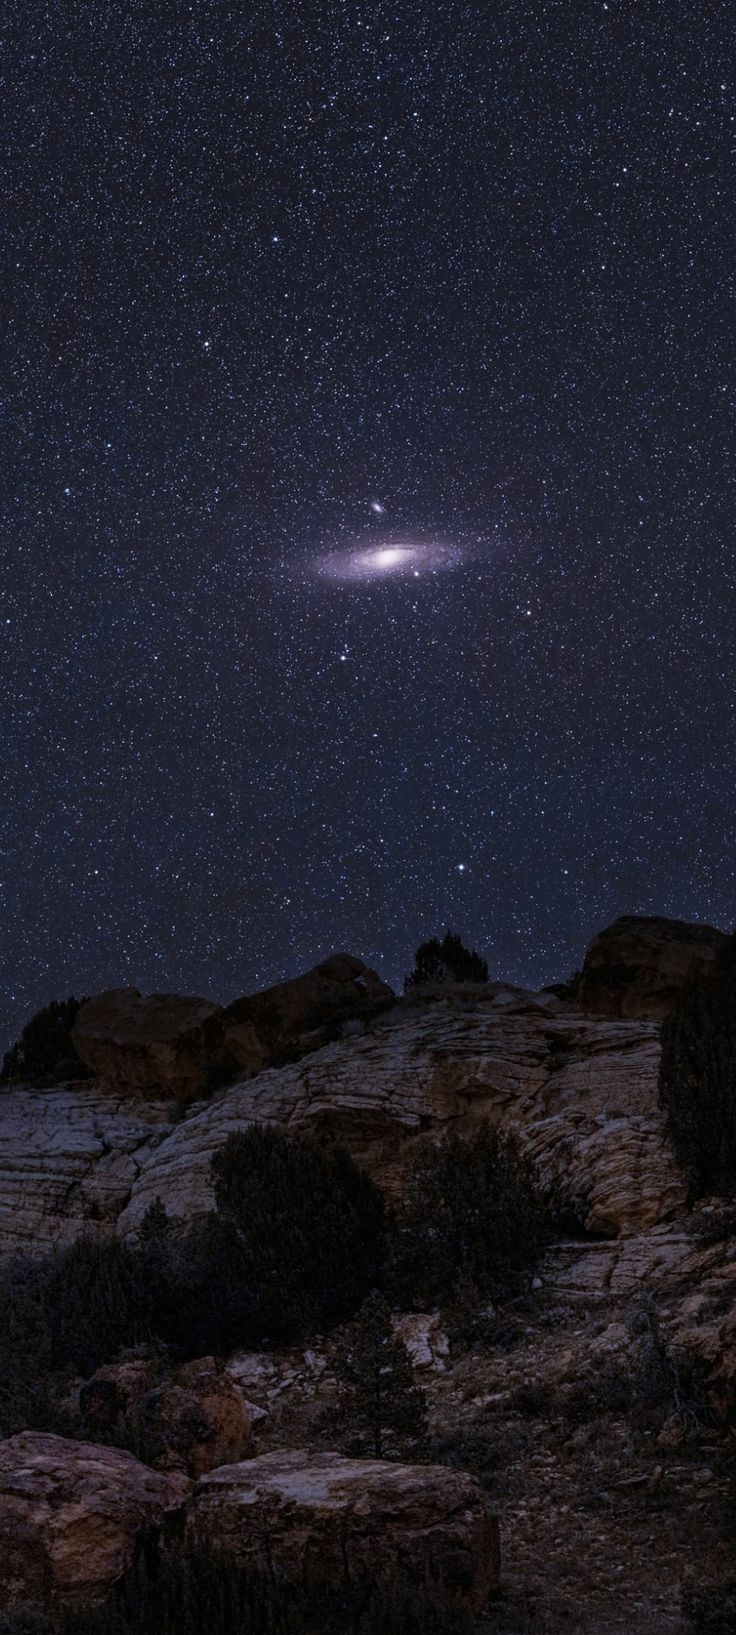 an image of the night sky with stars above rocks and trees in the foreground